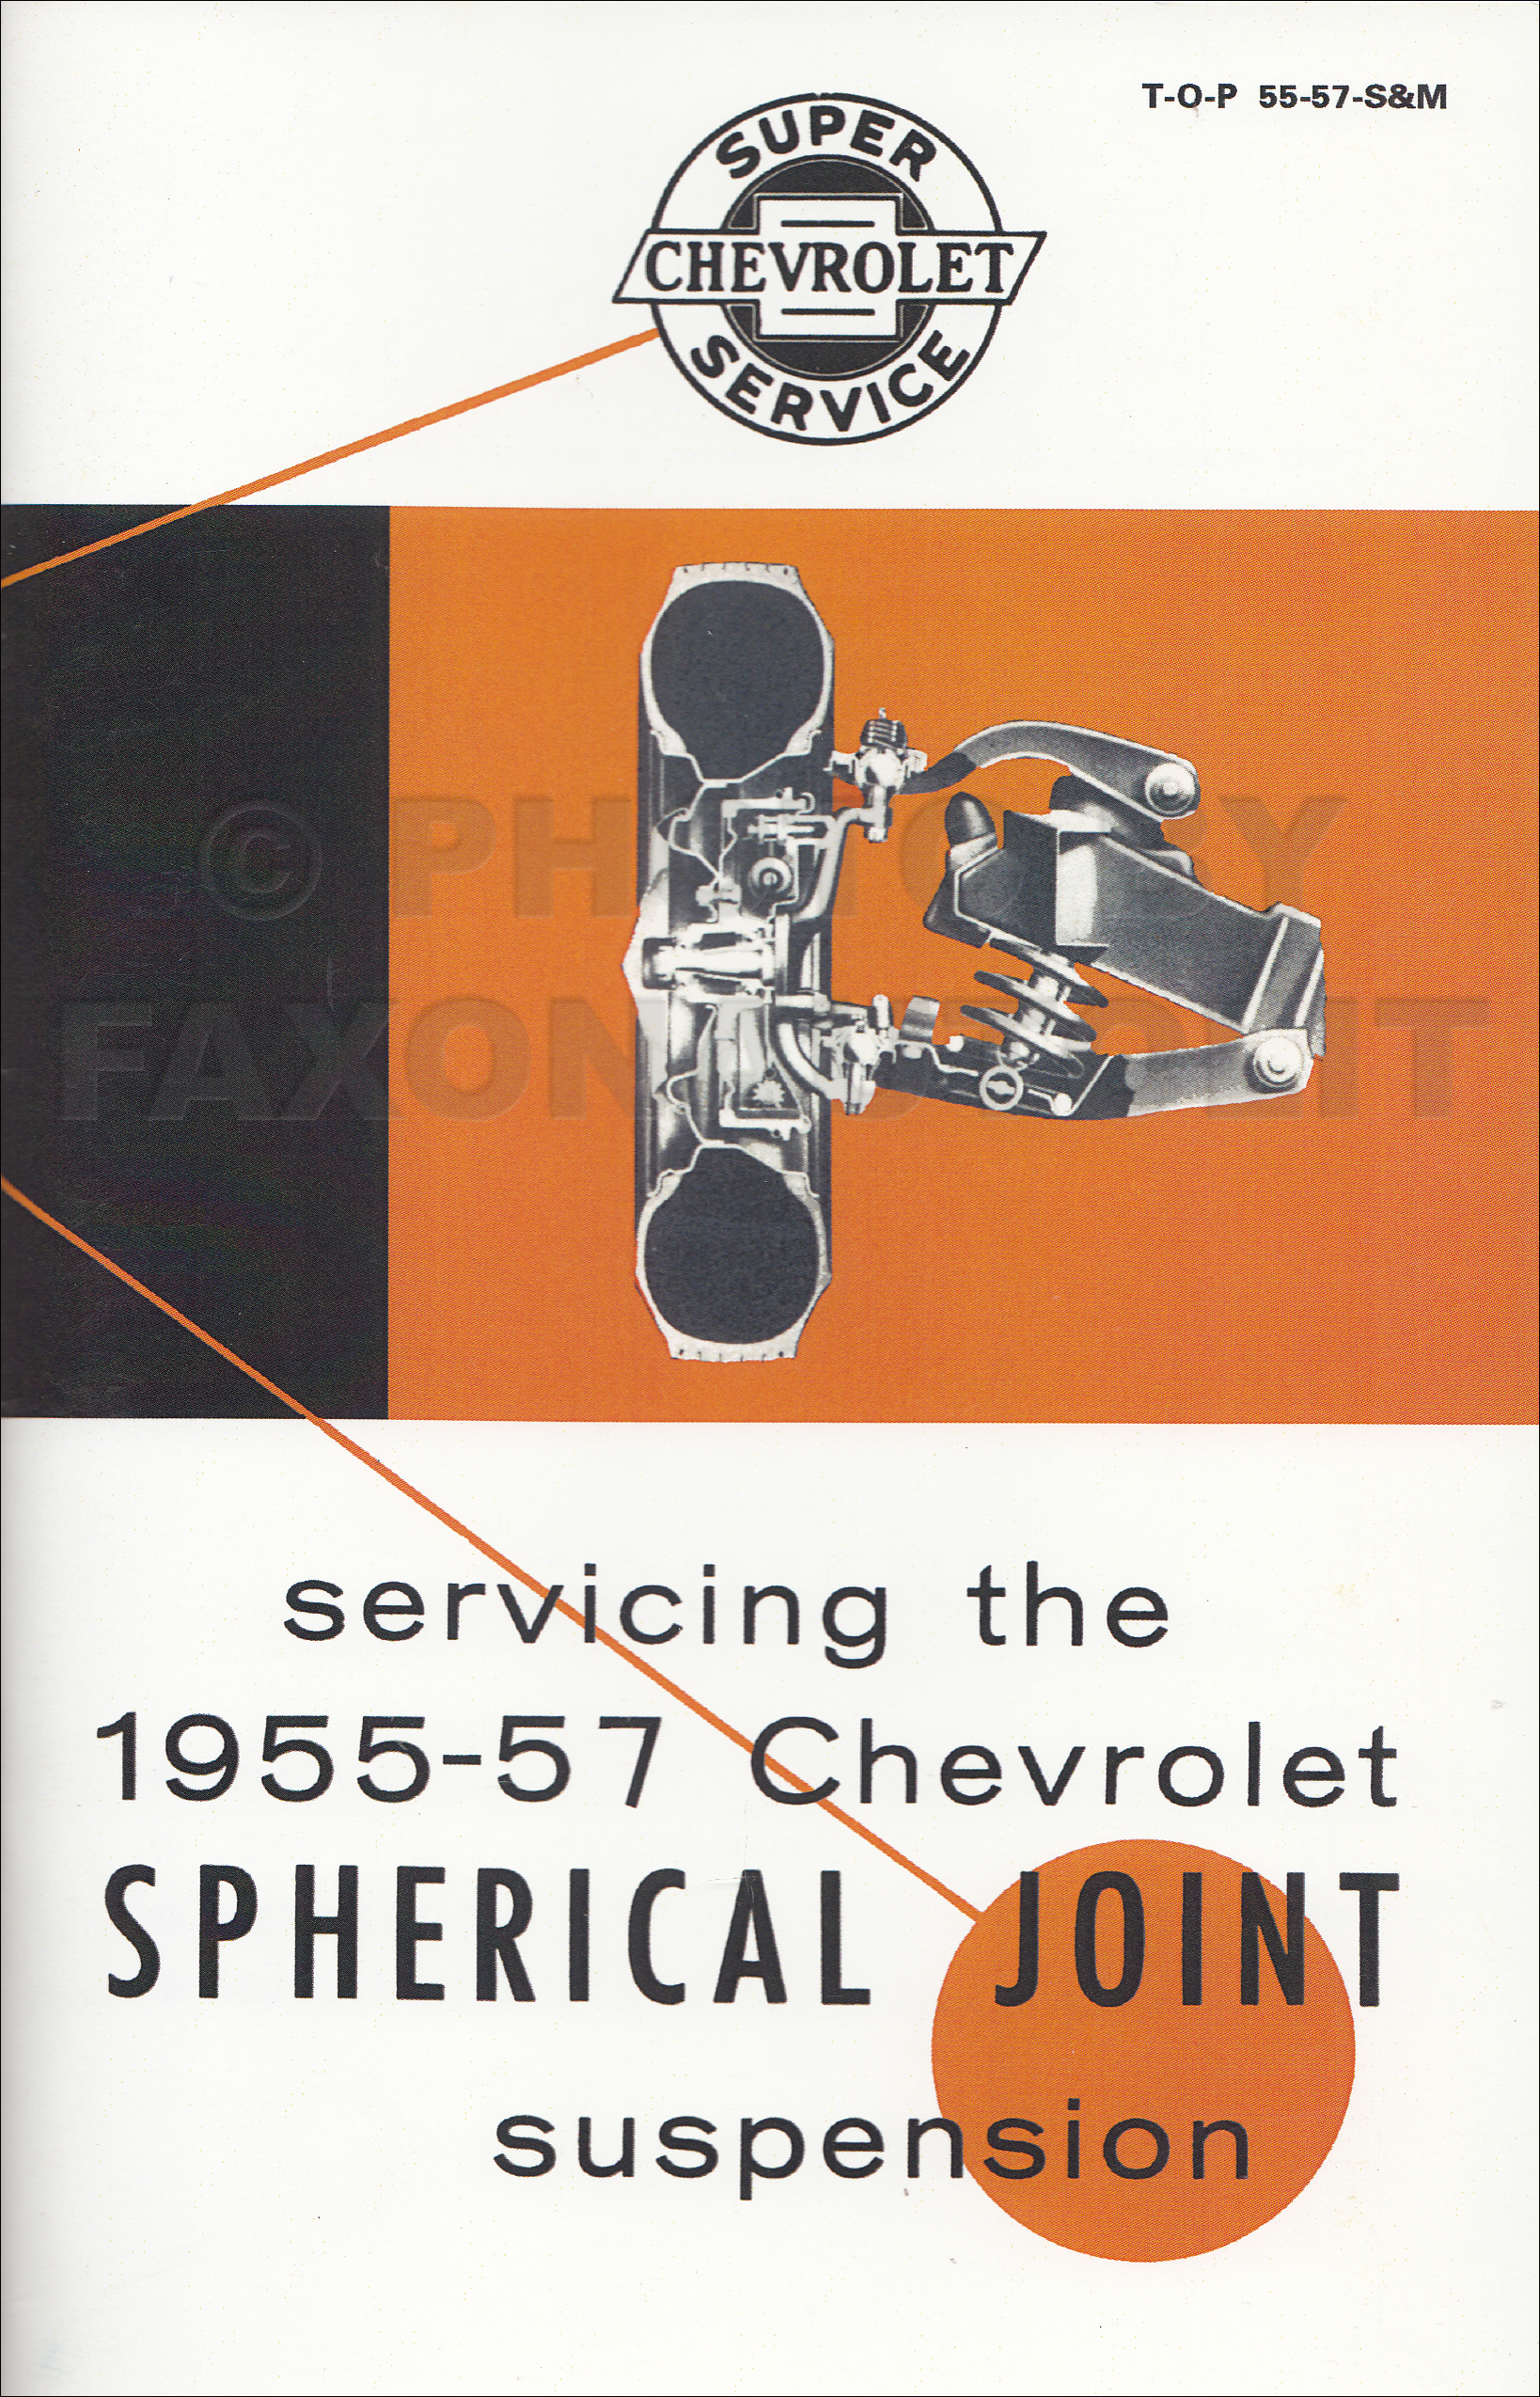 1955-1957 Chevrolet Spherical Joint Suspension Service Training Manual Reprint 